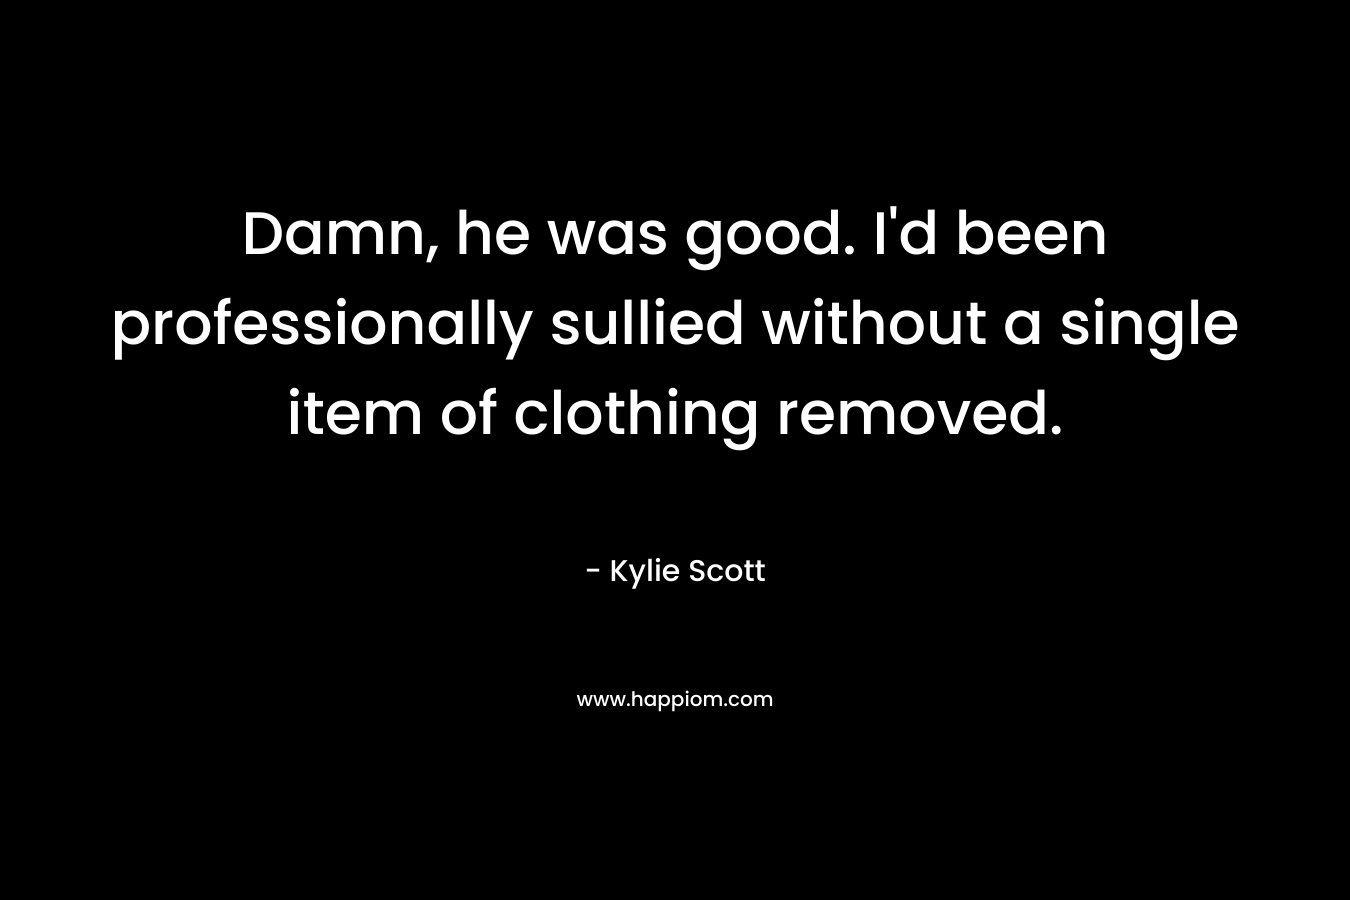 Damn, he was good. I’d been professionally sullied without a single item of clothing removed. – Kylie Scott